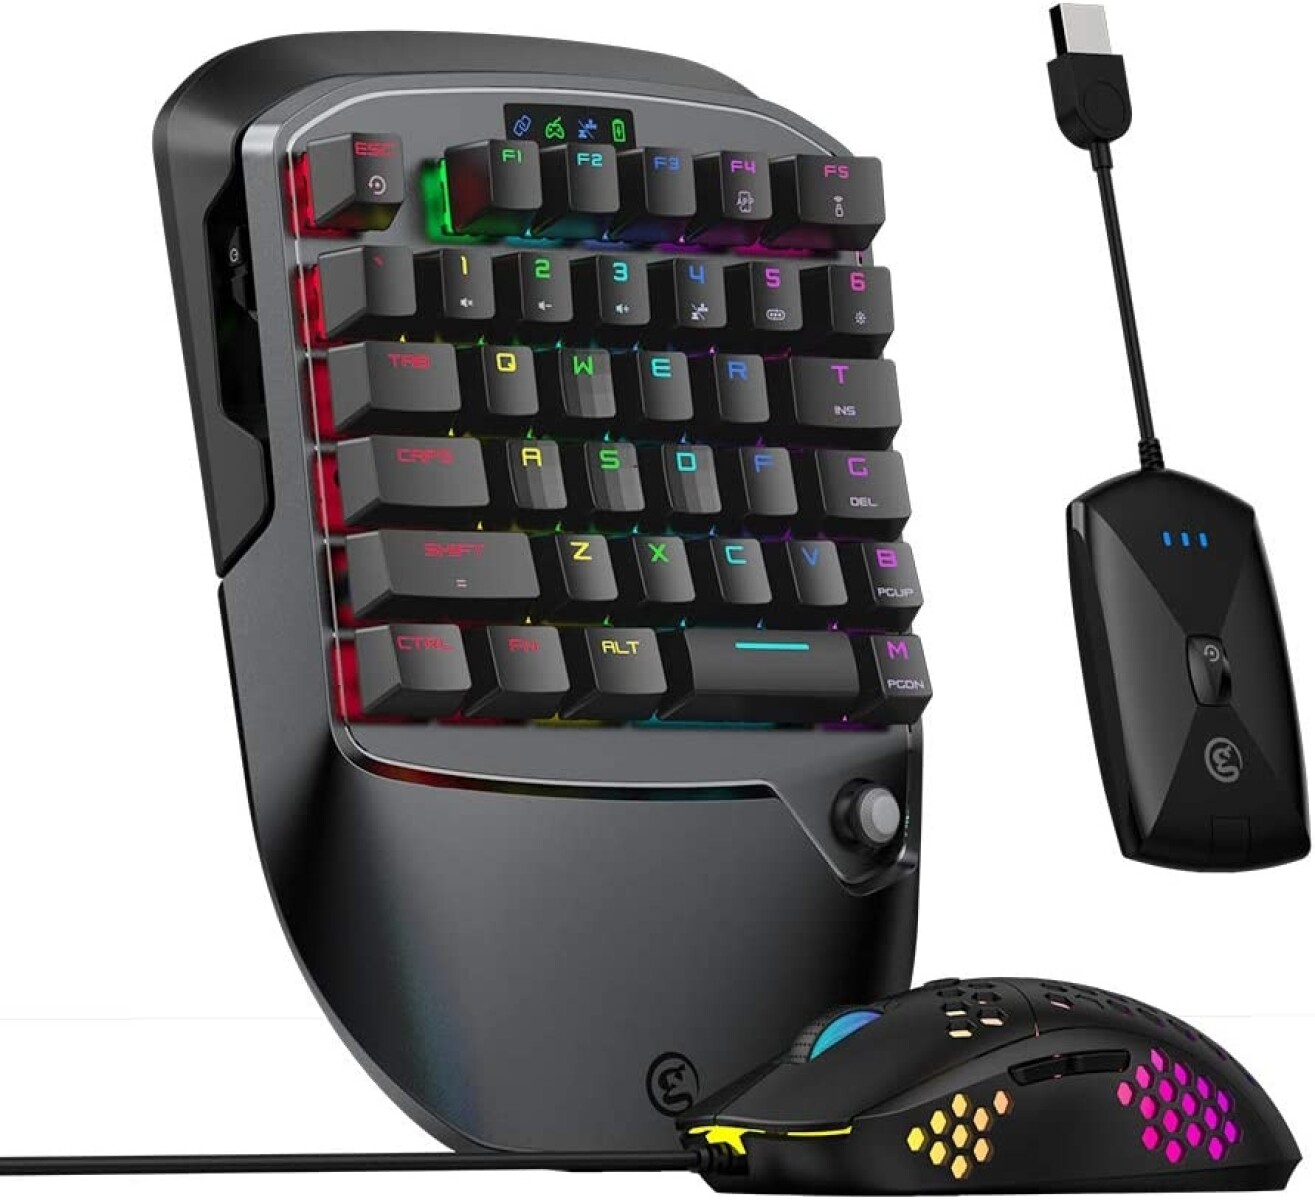 Combo Gamesir Teclado y Mouse VX2 Aimswitch - 001 